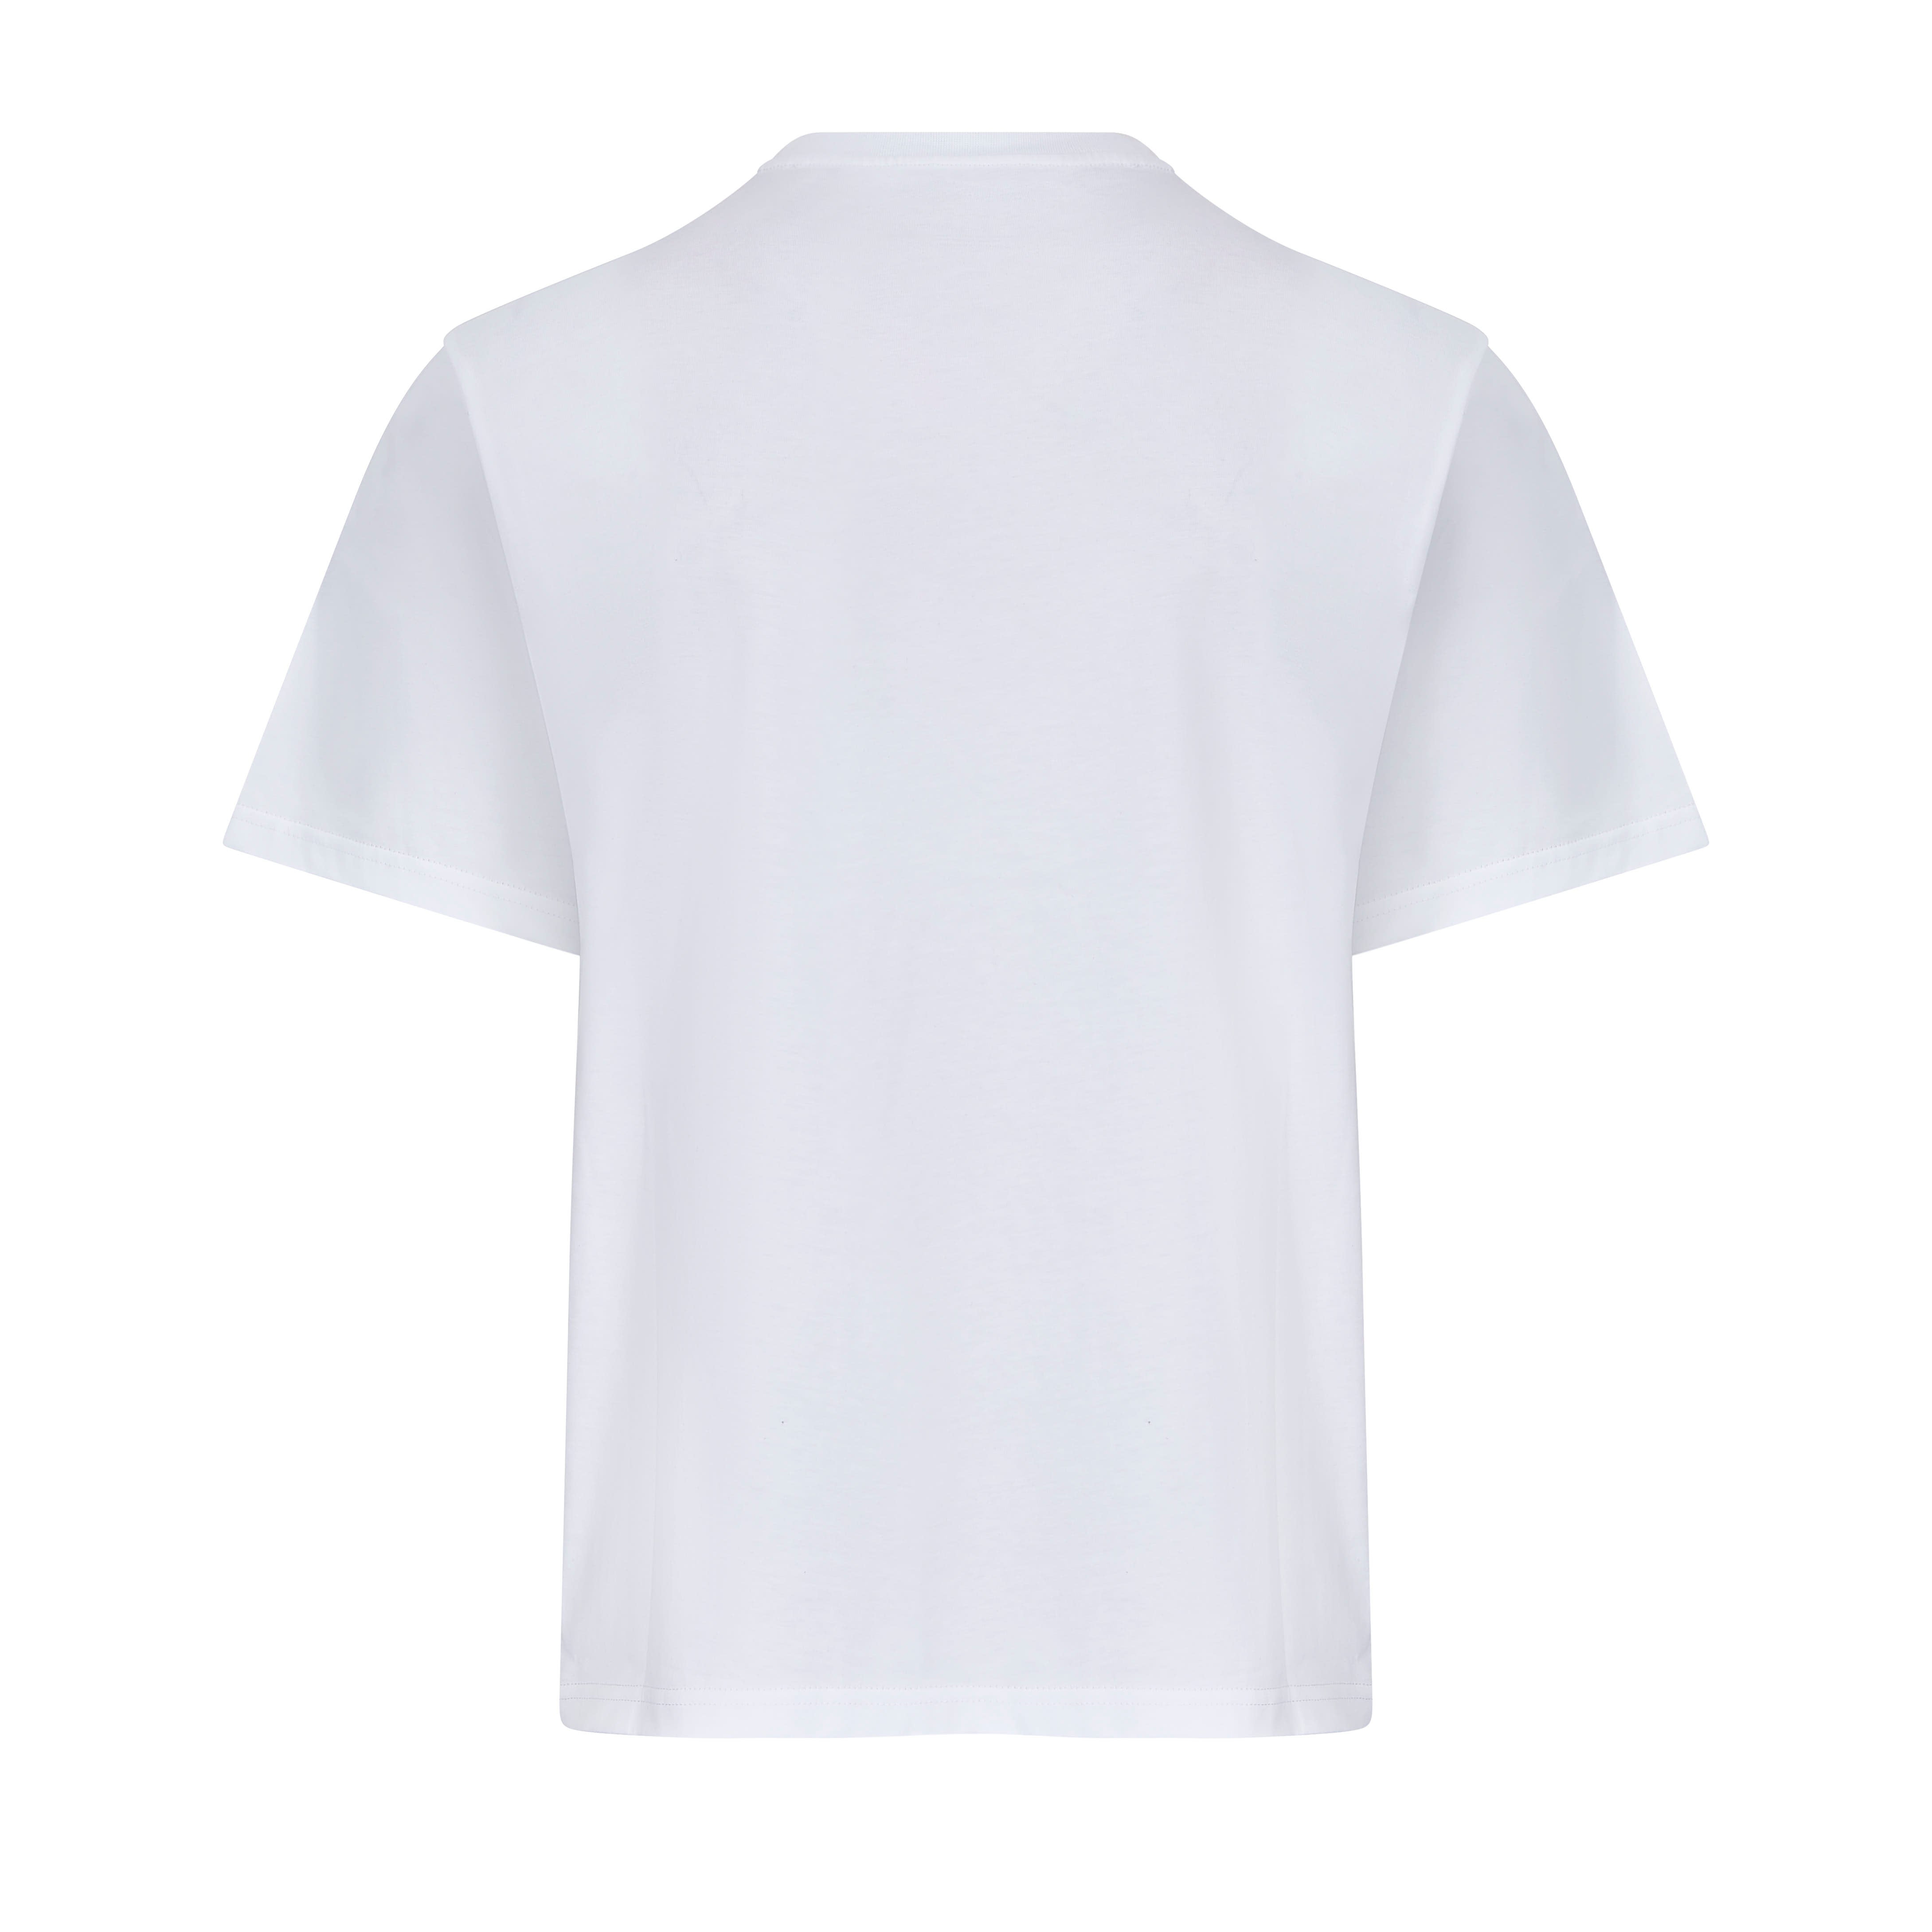 CLASSIC S/S T-SHIRT in WHITE | Martine Rose